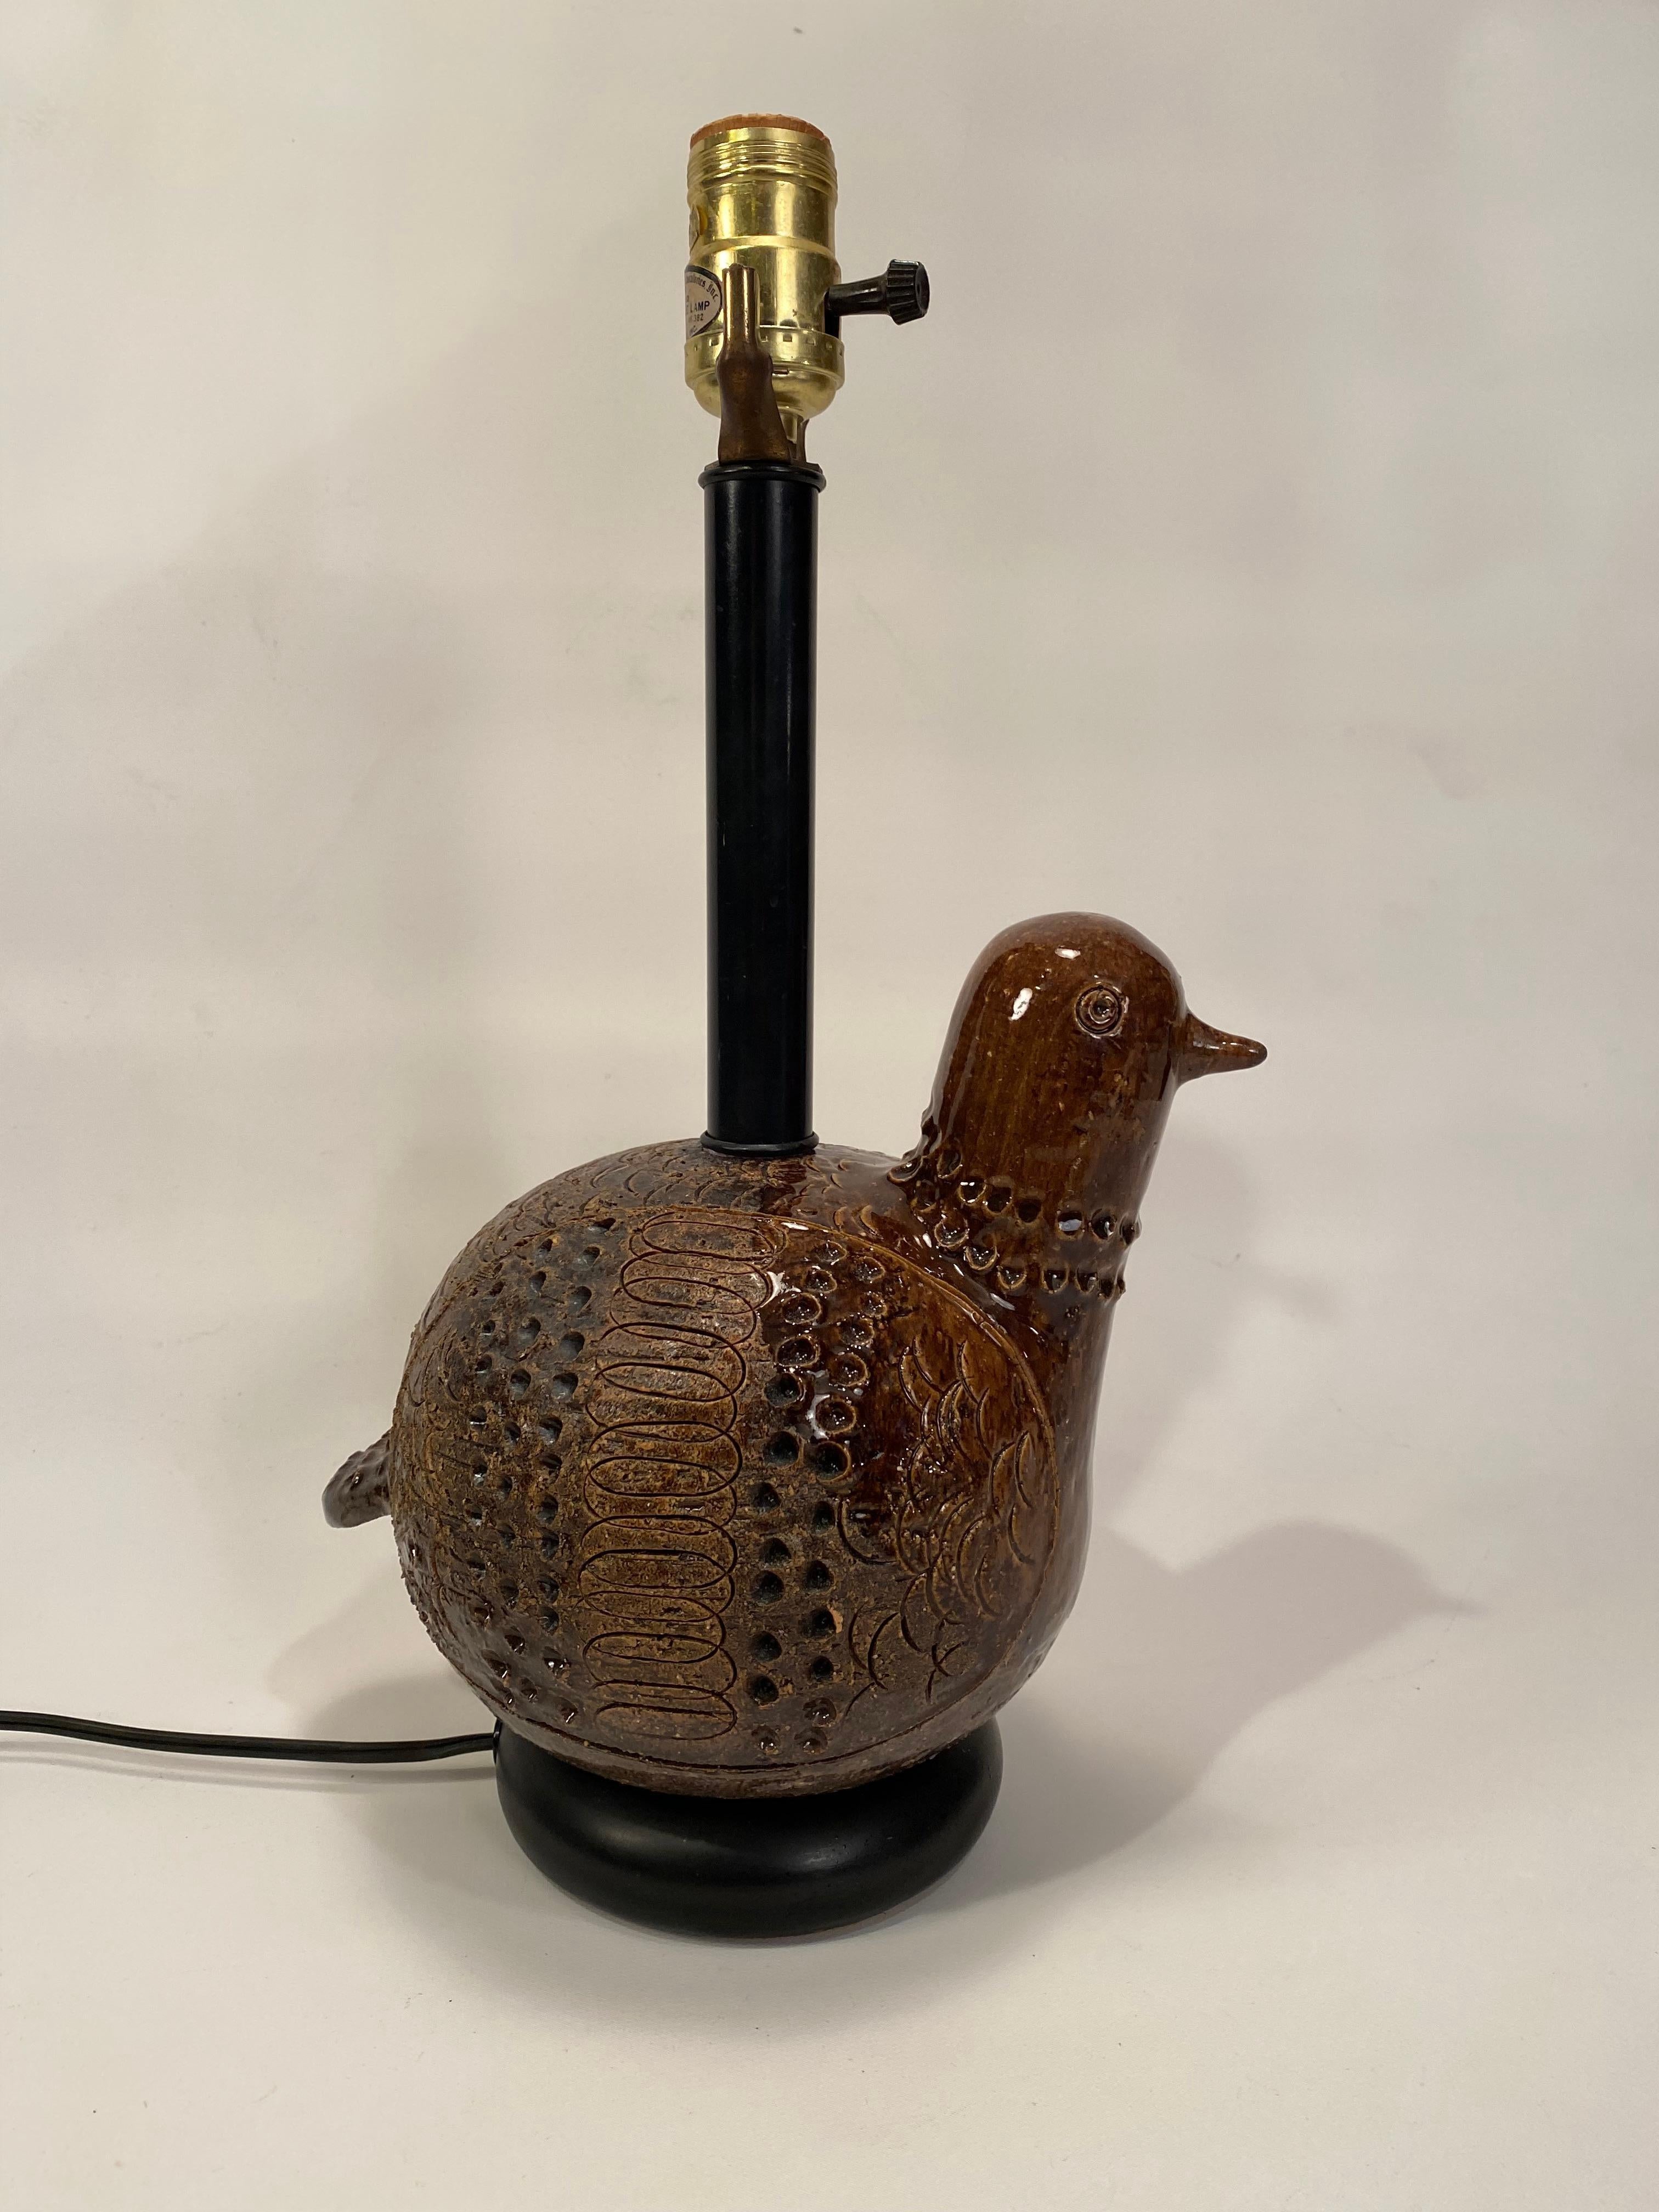 Aldo Londi Bitossi pottery bird lamp. Matte brown body with a gloss glazed head and tail feathers. Nice crisp carved and incised detail. Circa 1950-60. Good overall condition. No visible cracks or hairlines. Working wiring. Lamp hardware is original